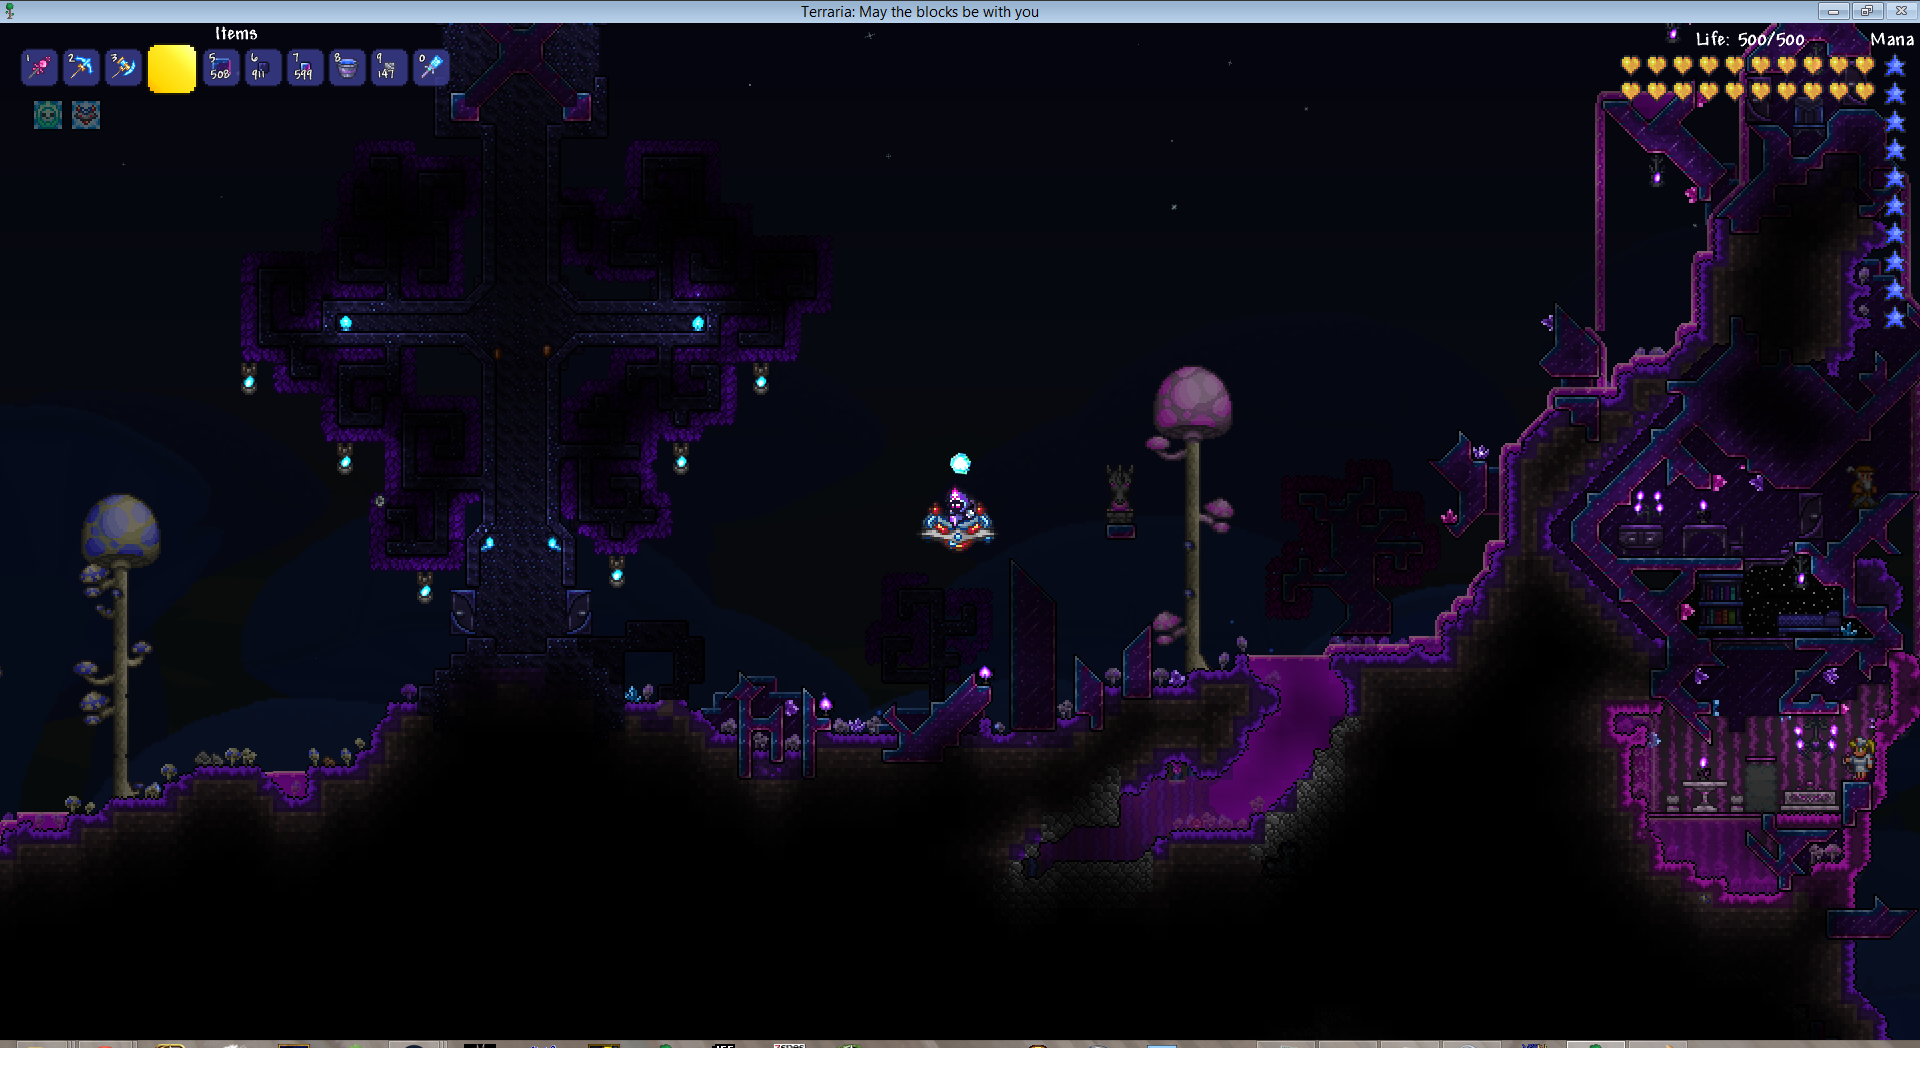 The build is in a mushroom biome, but Terraria's camera system didn&ap...